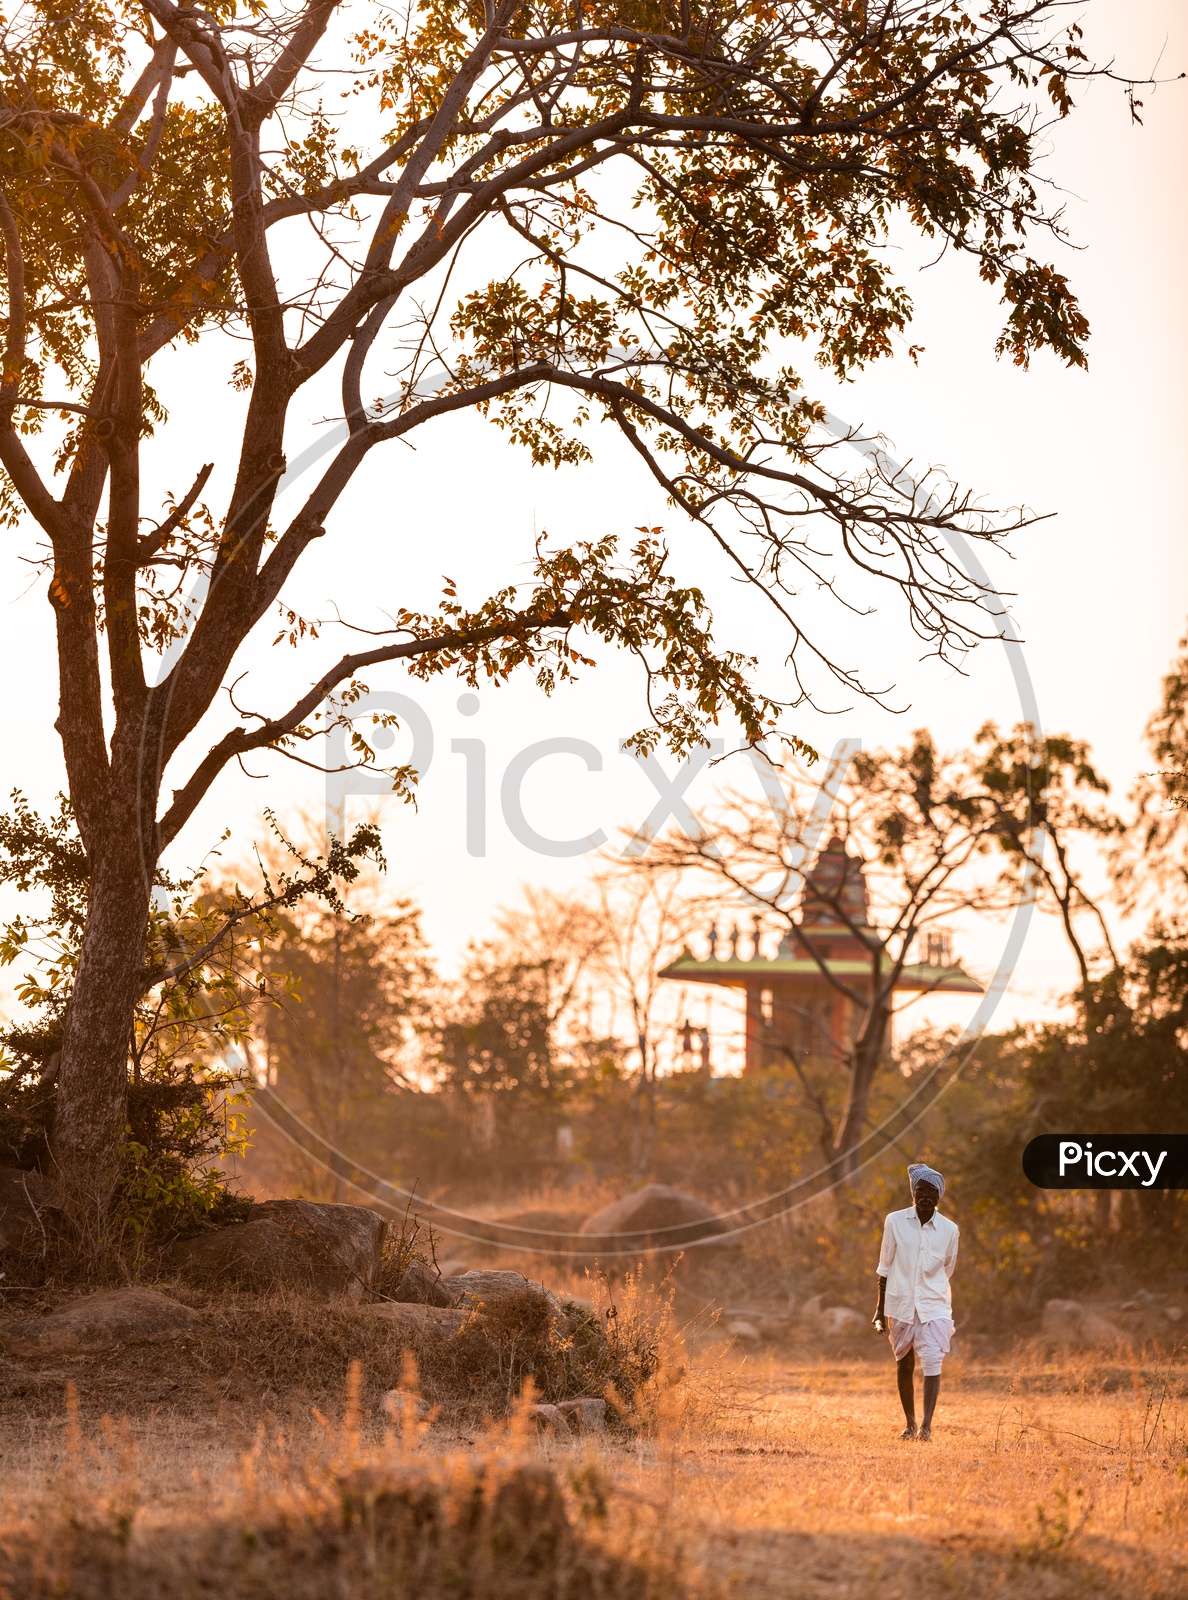 An Old Man Walking to a Agricultural Farm On a Foggy Winter Morning in Rural Villages of Telangana